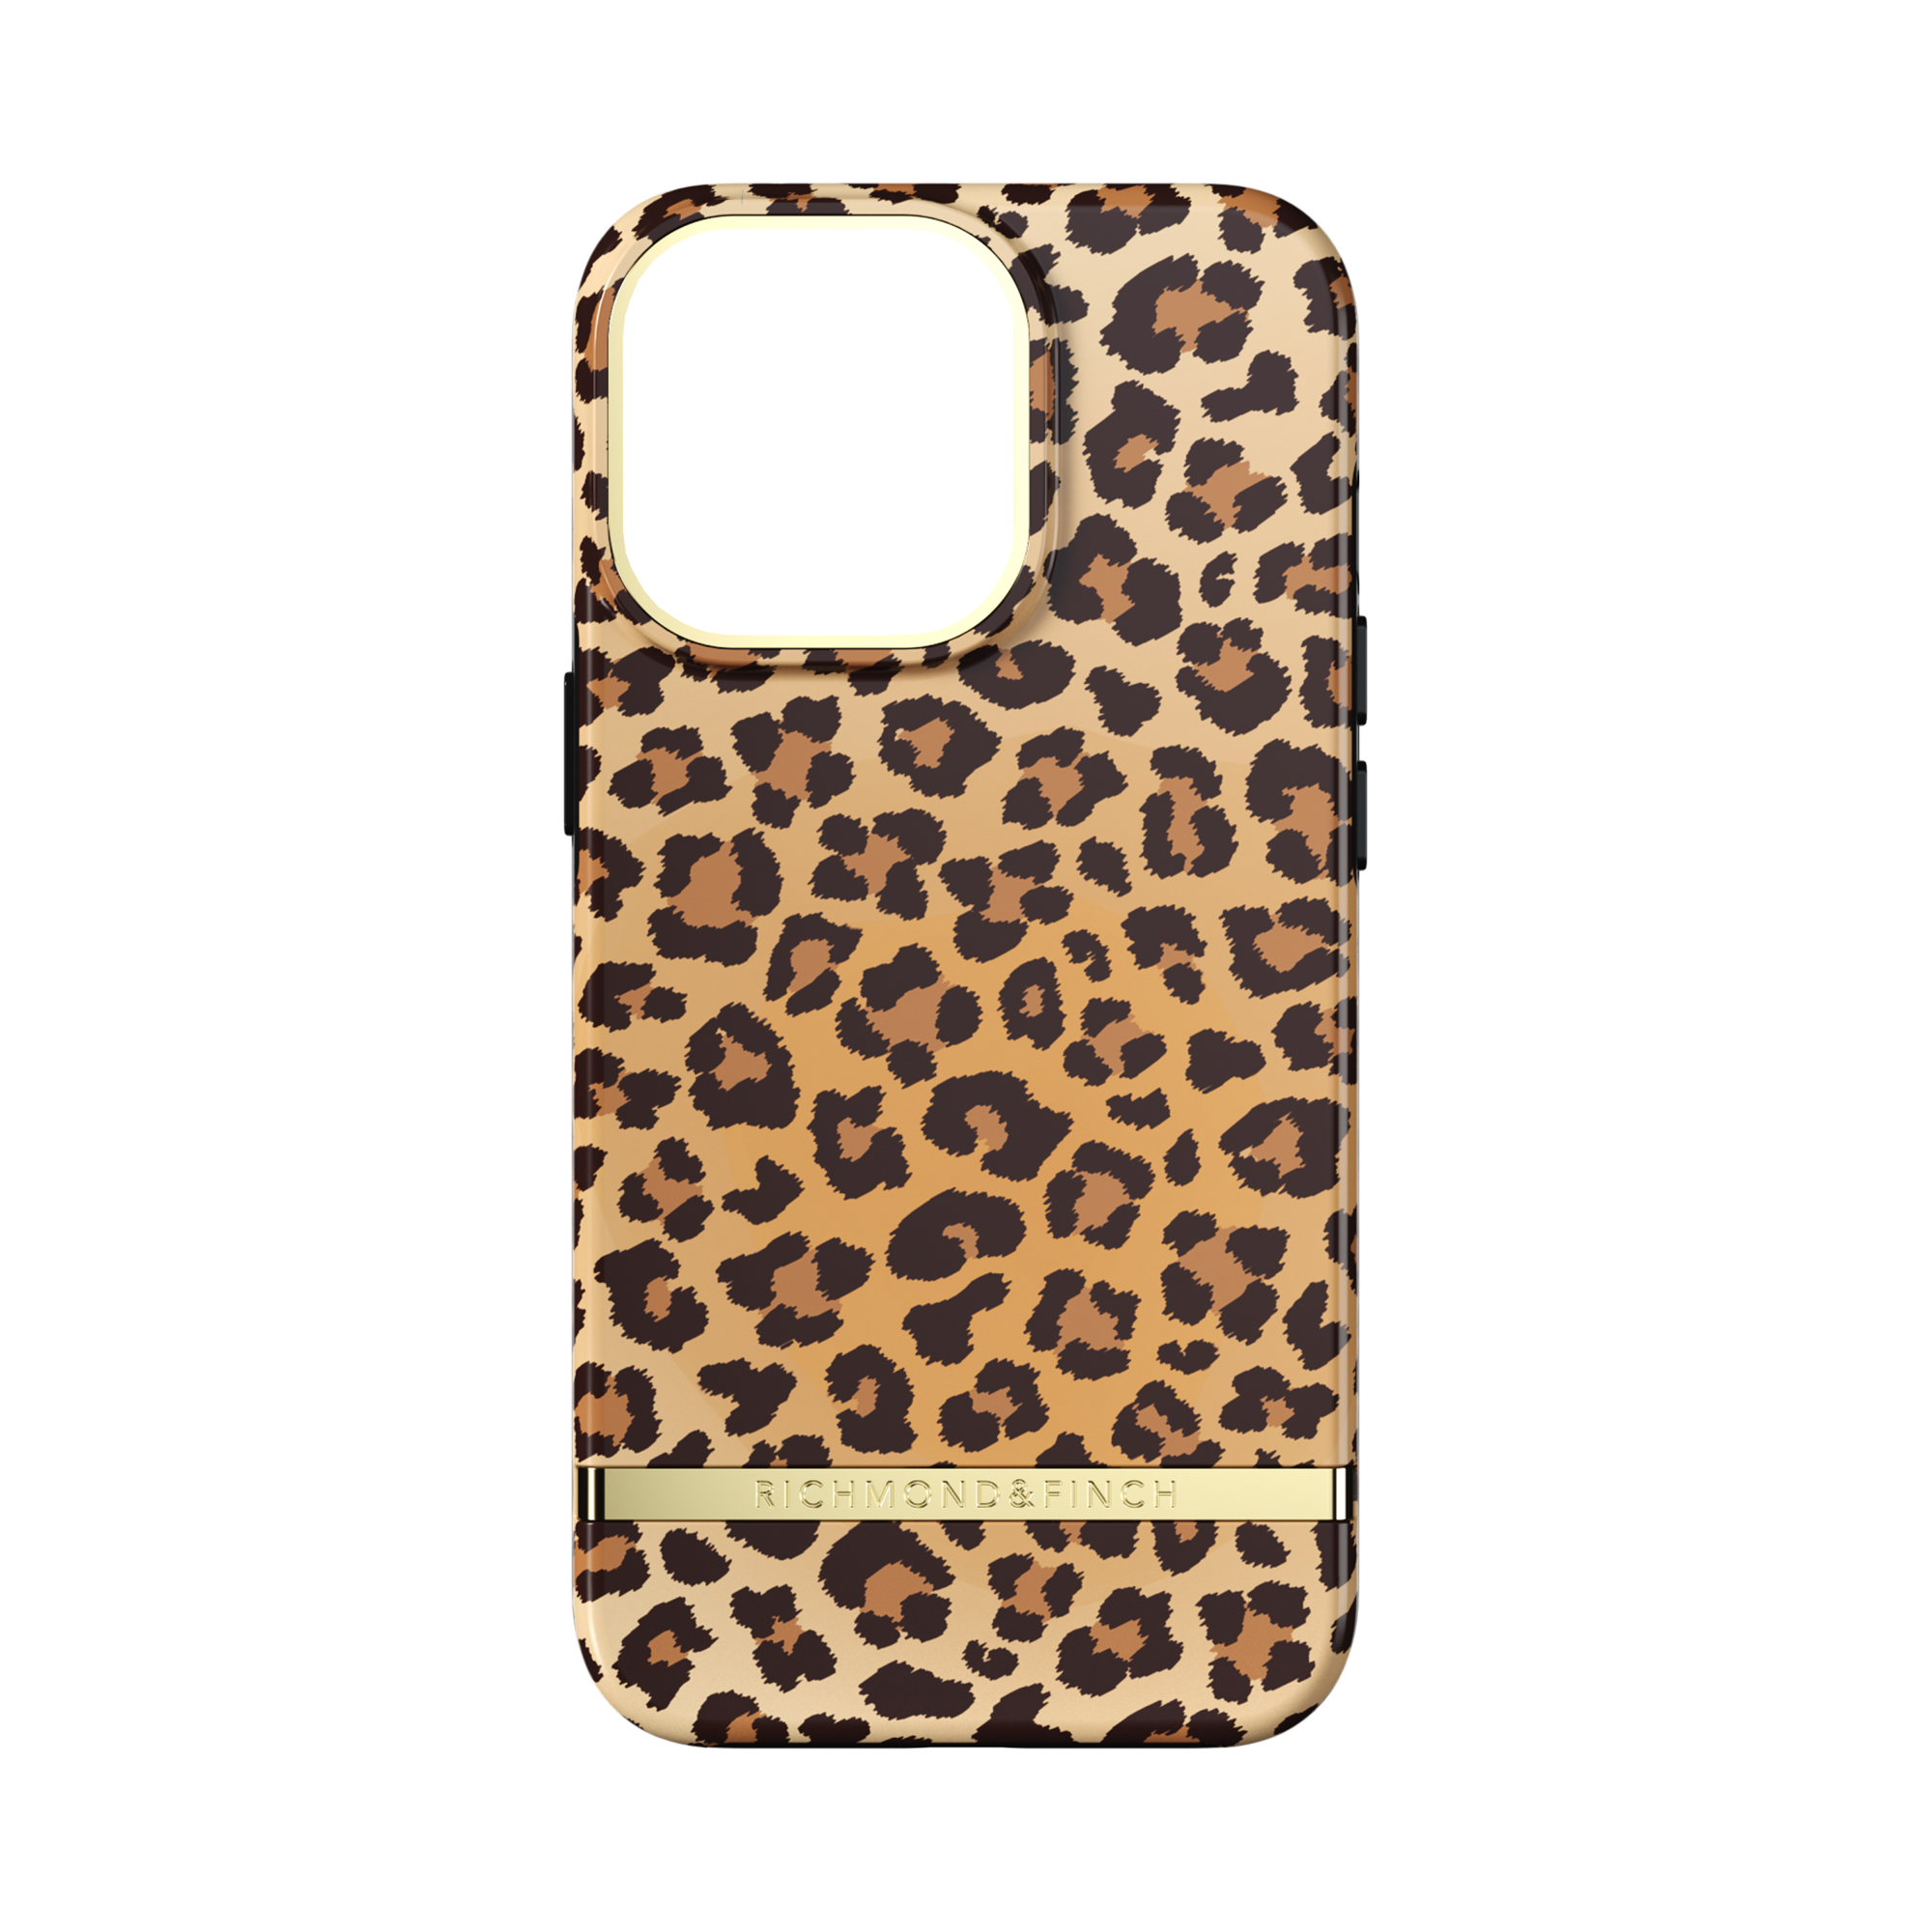 PRO, Leopard Soft IPHONE 13 Backcover, 13 Pro, RICHMOND YELLOW iPhone FINCH APPLE, &